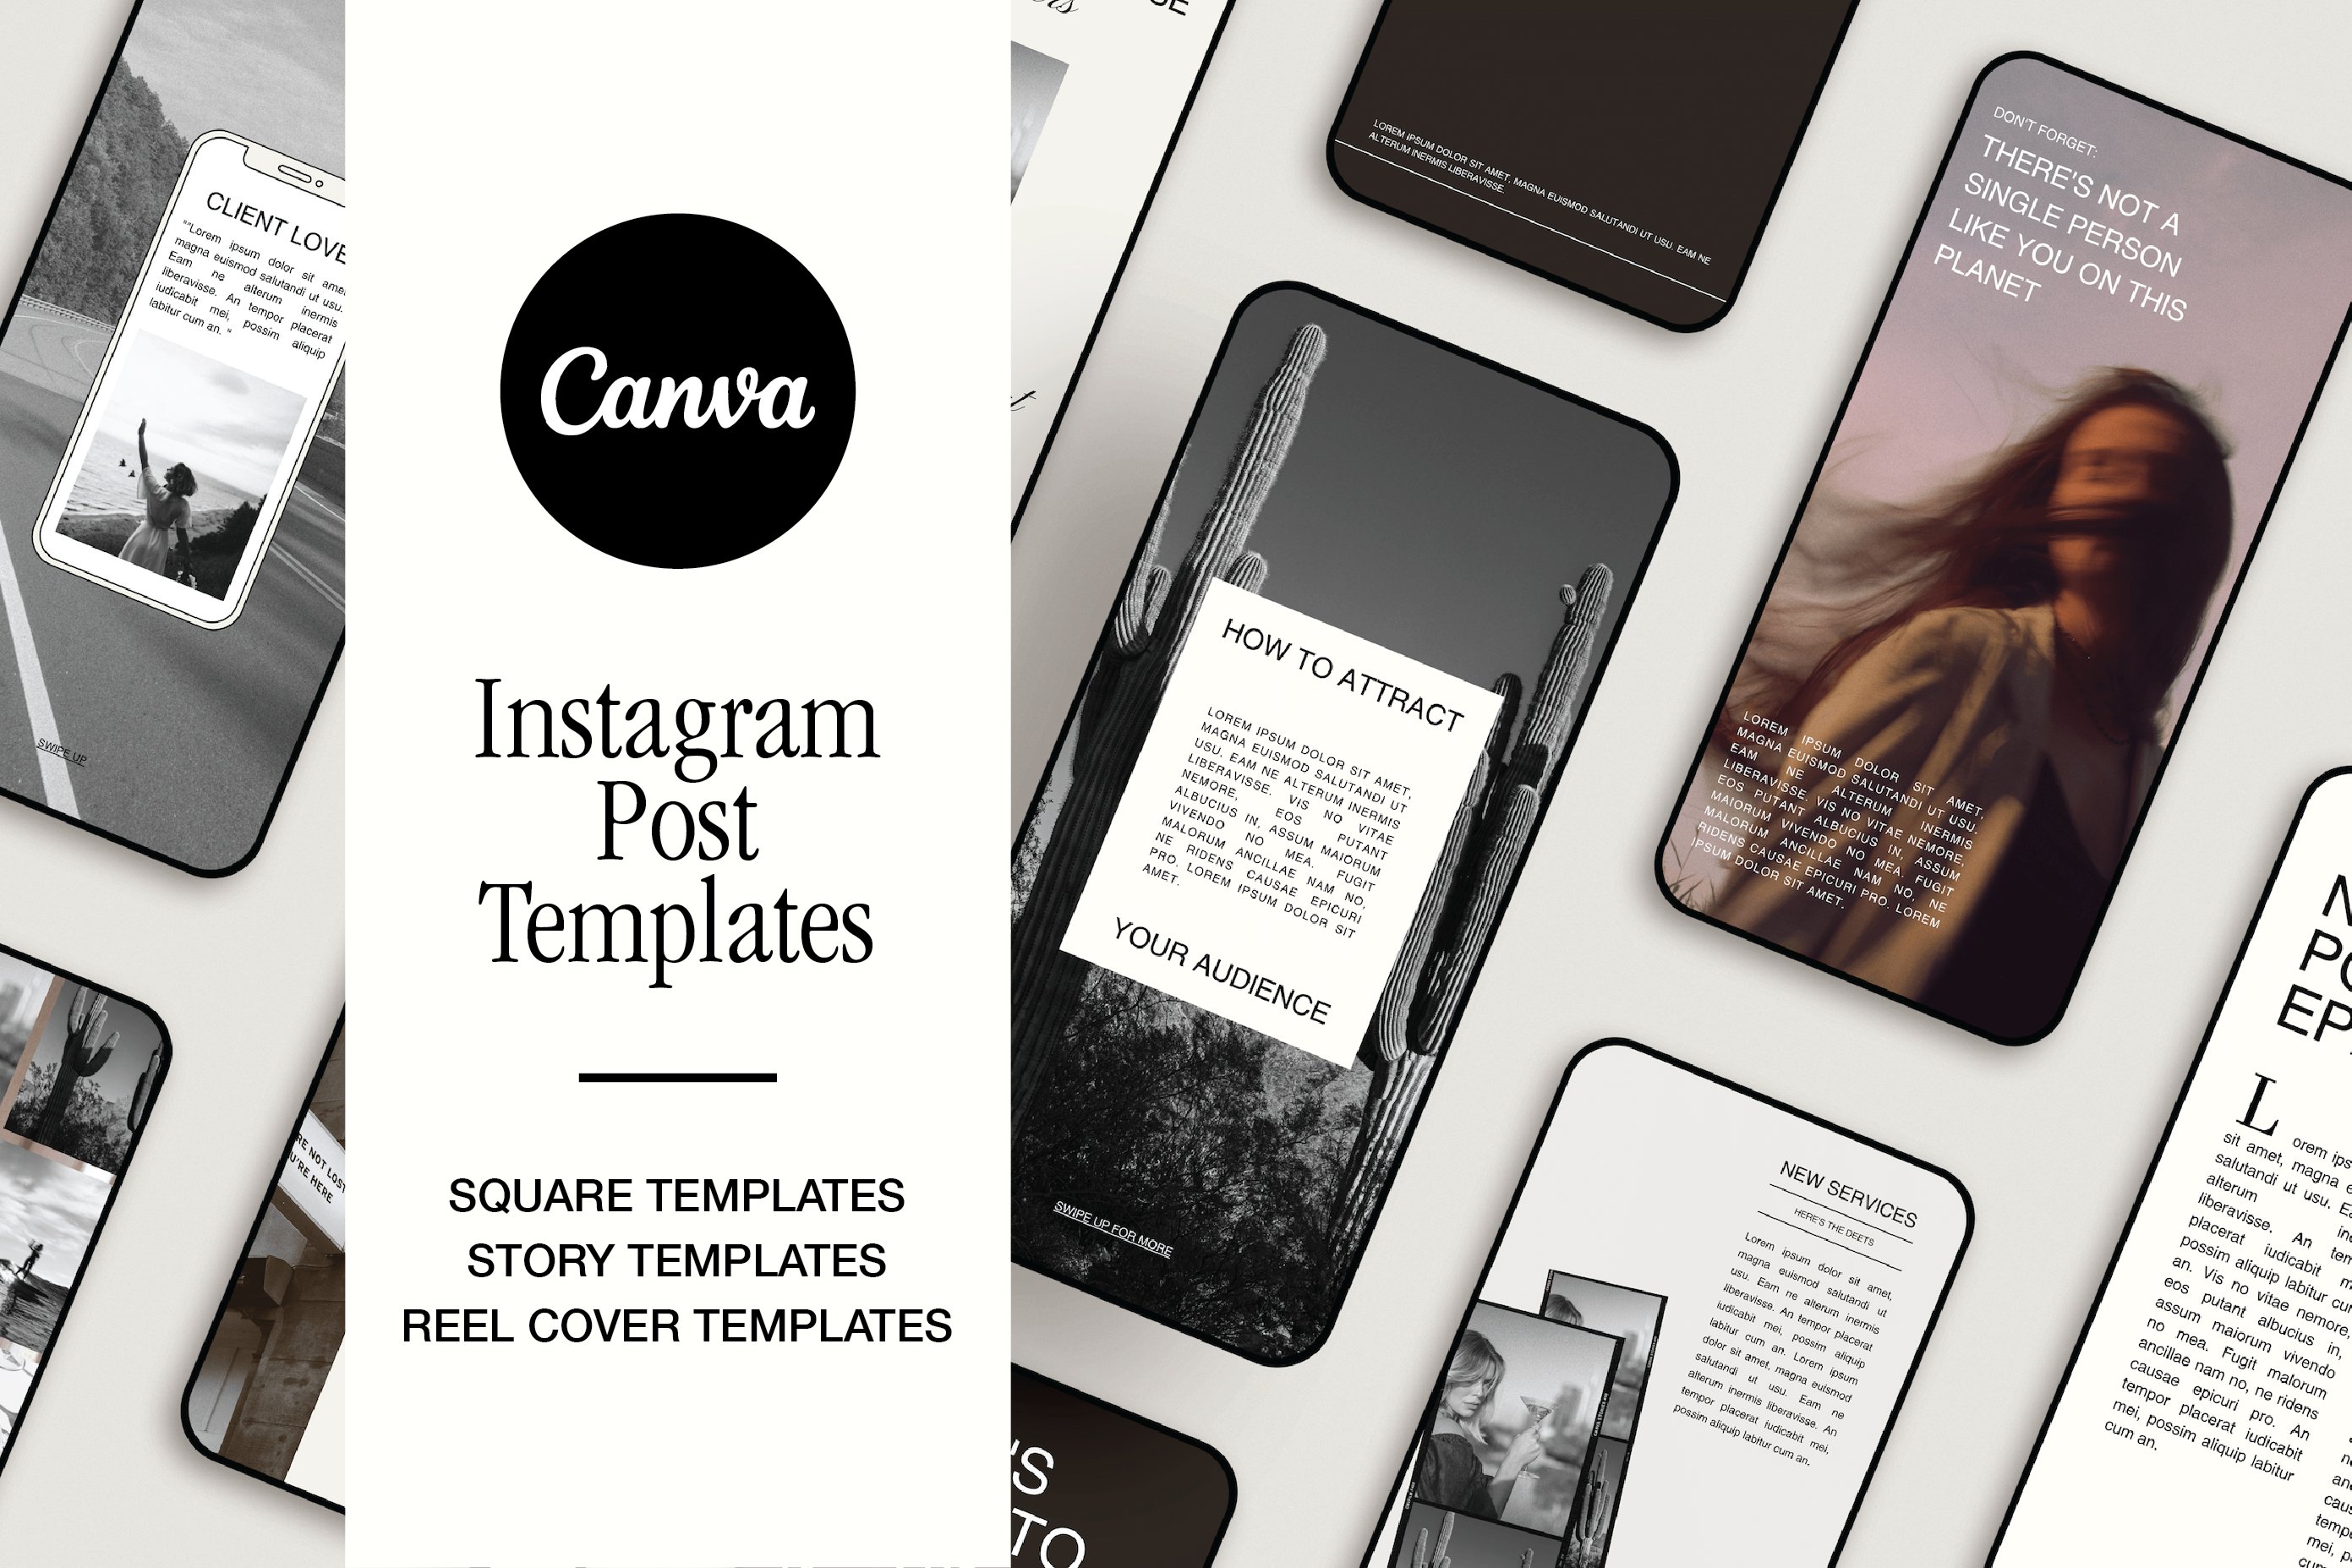 Aesthetic Social Media Templates cover image.